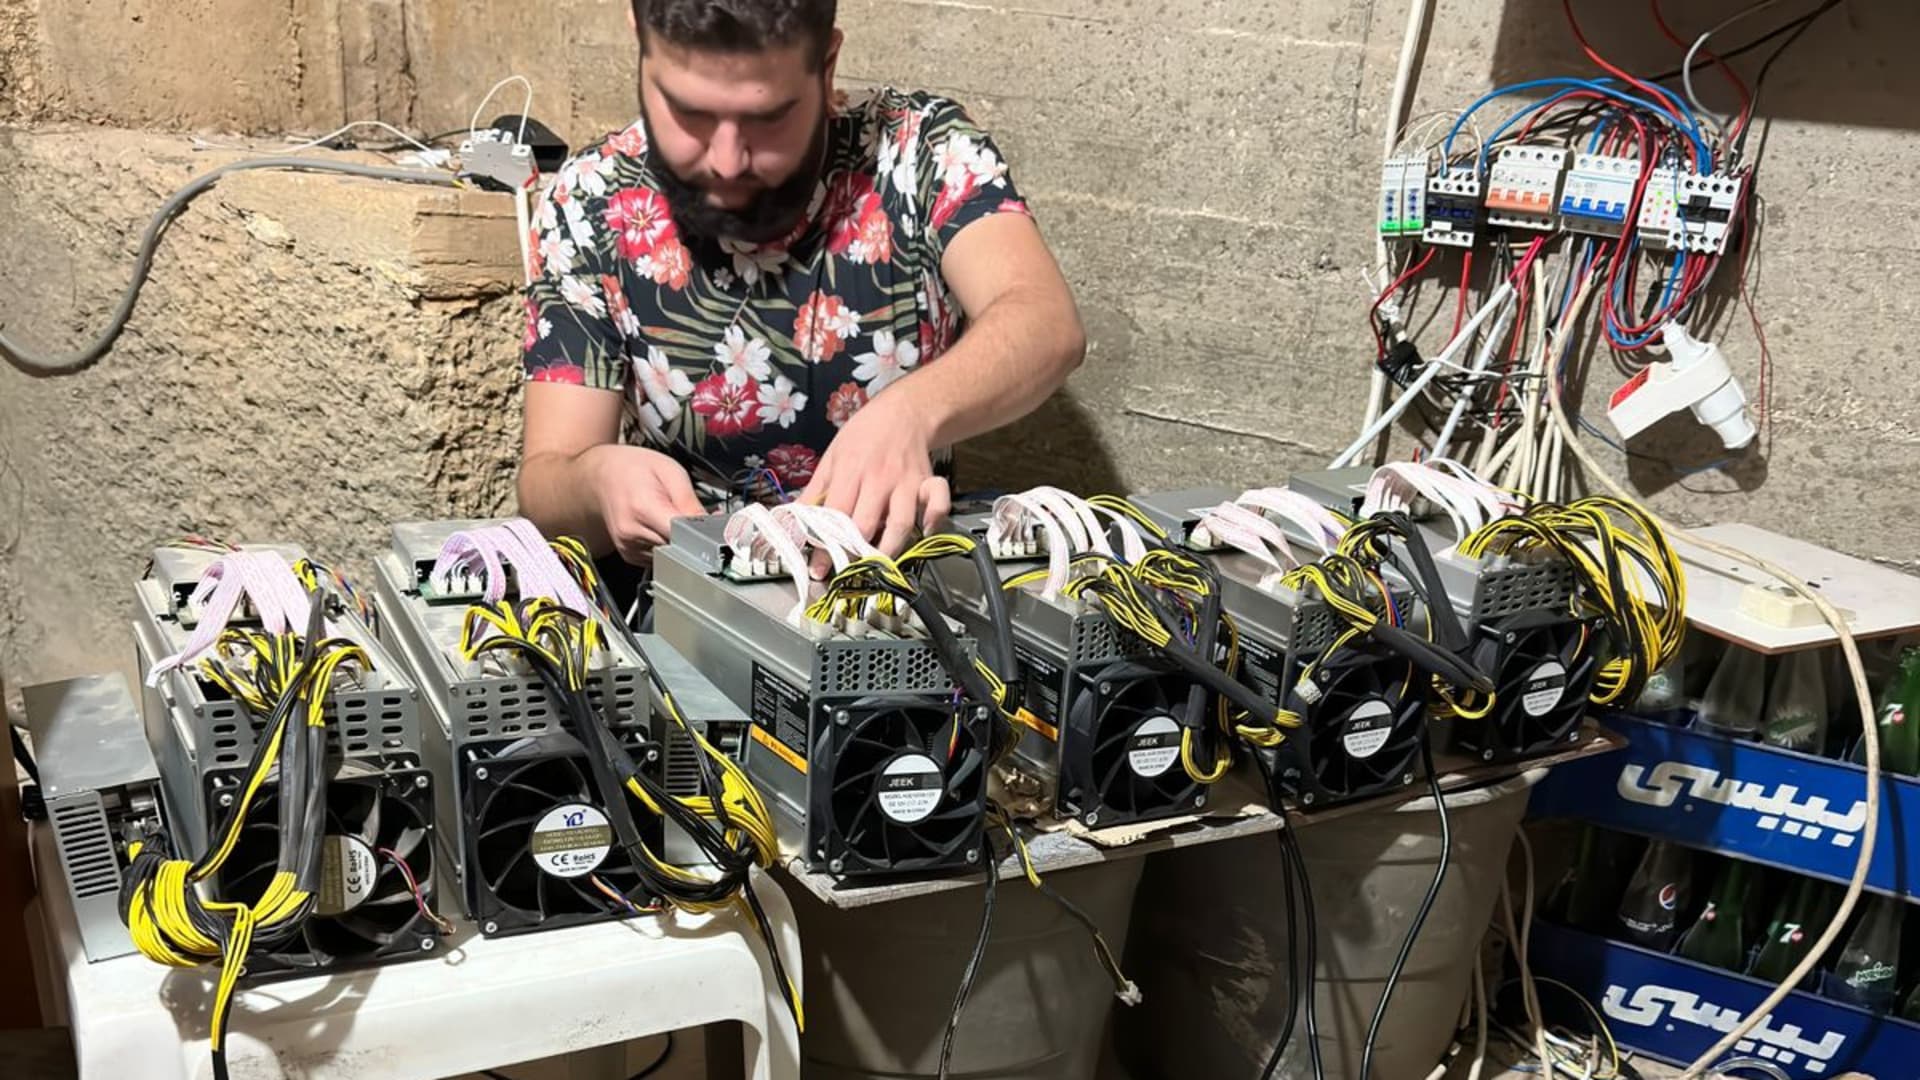 Bitcoin mining in Lebanon earns this 22-year-old ,000 a month